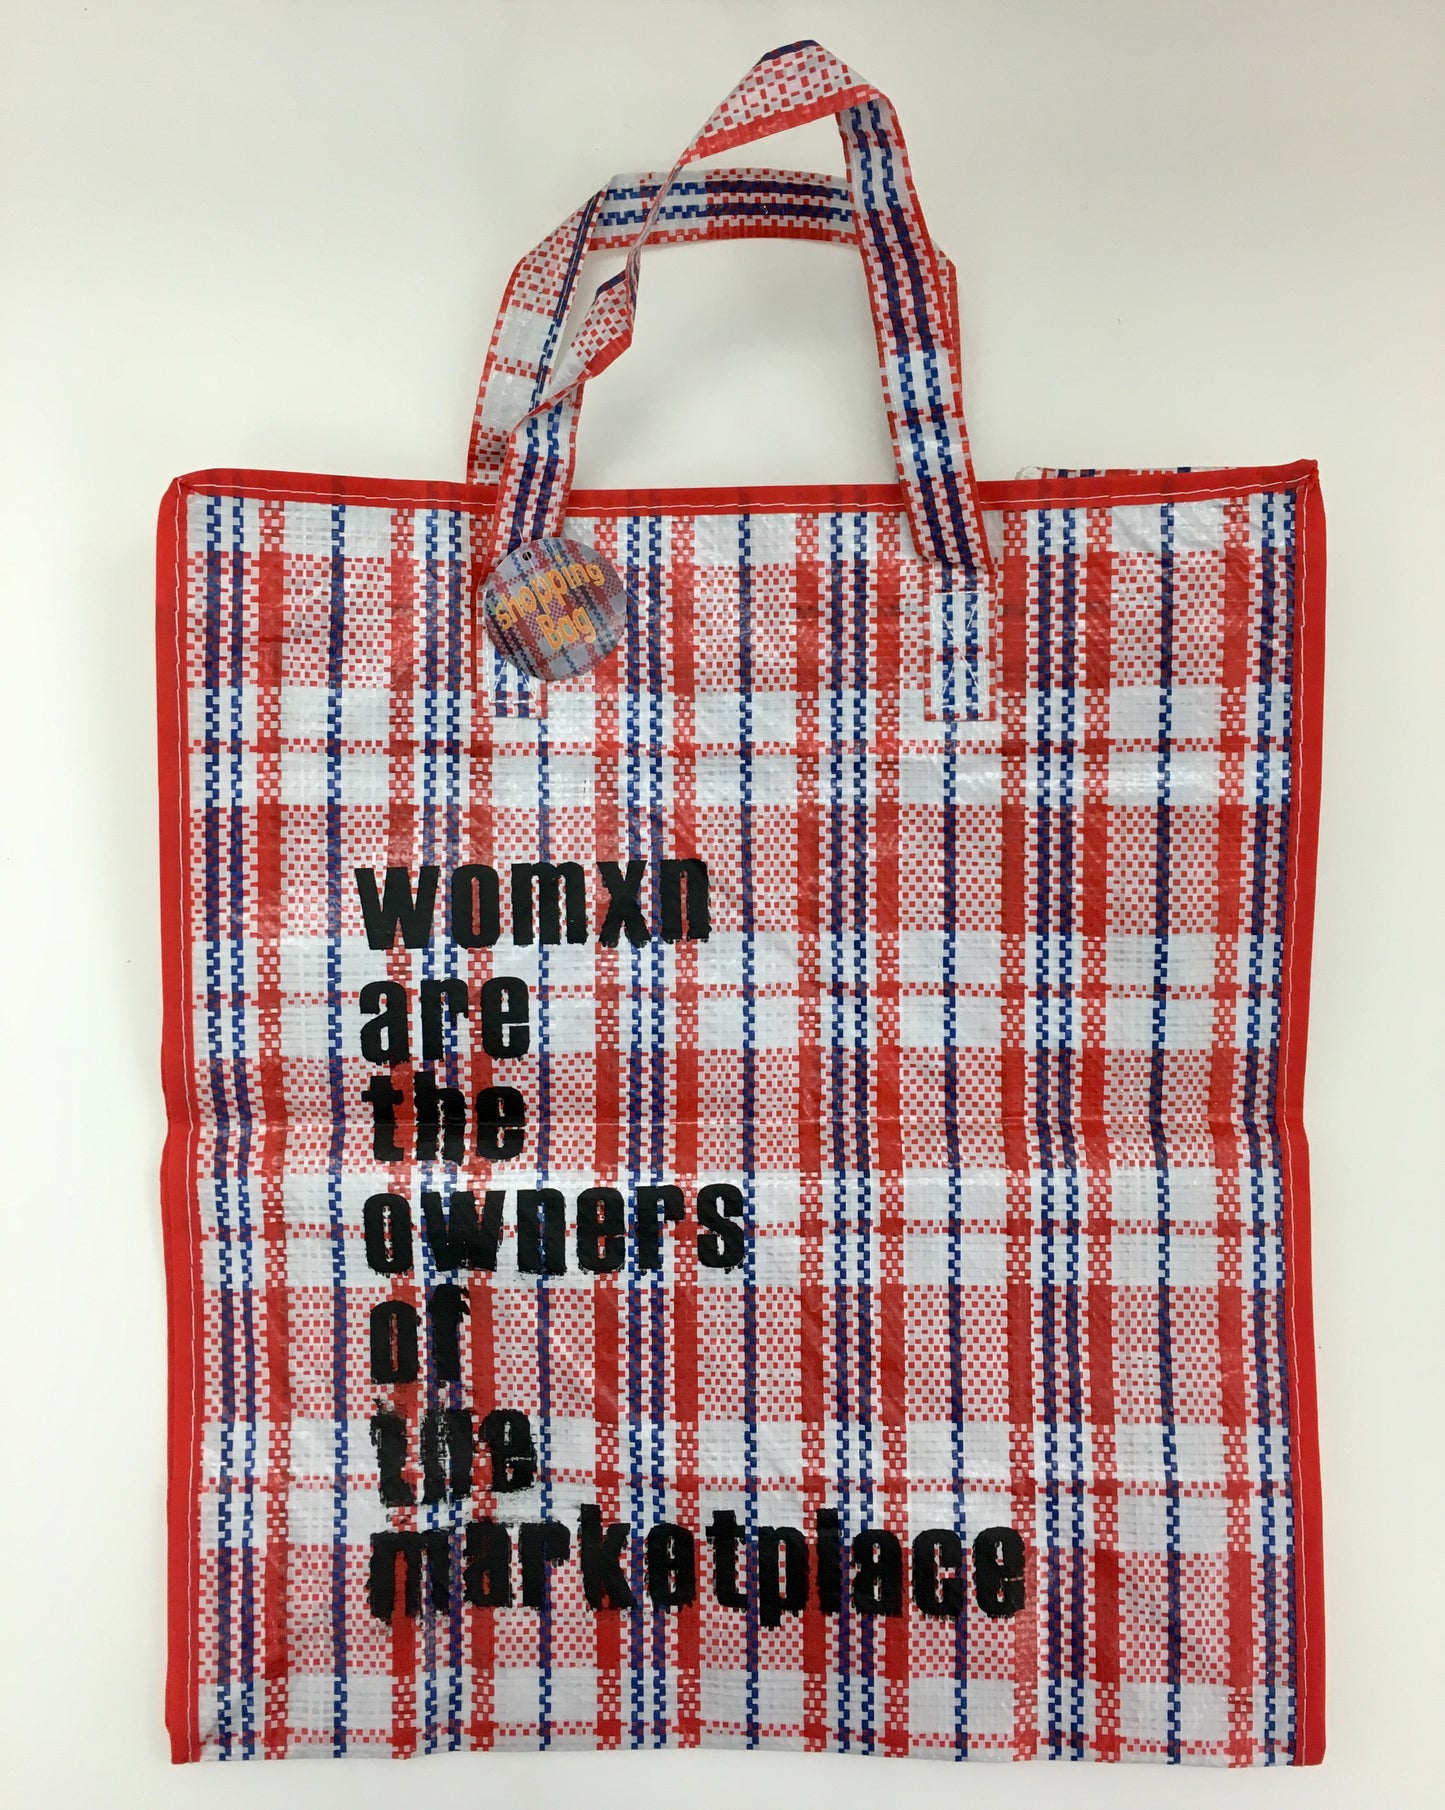 "Womxn Are the Owners of the Marketplace" Tote Bag